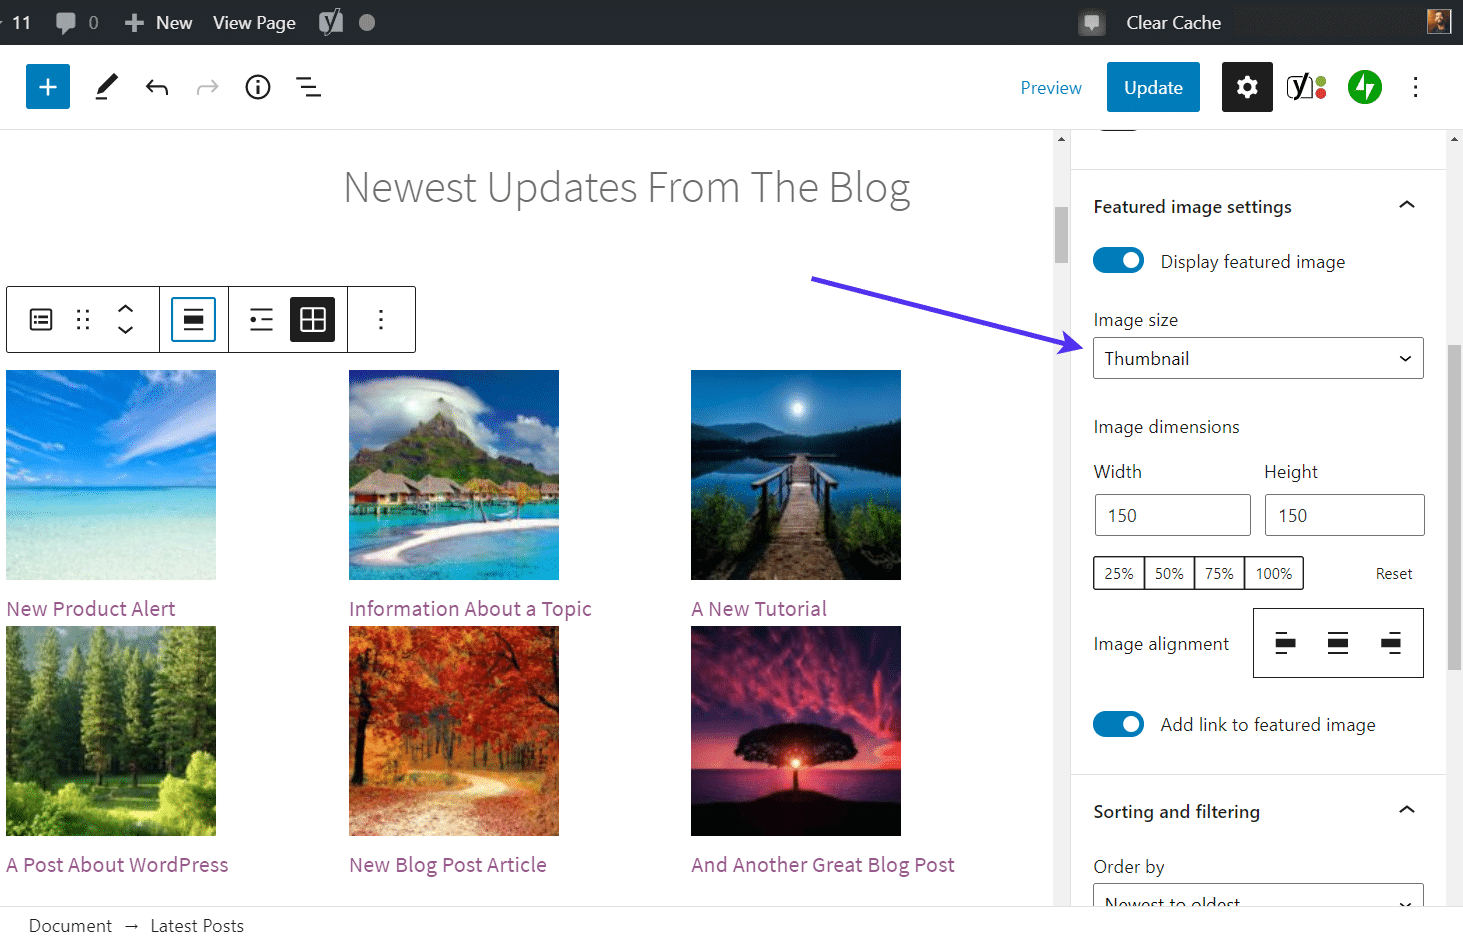 Set the featured image size